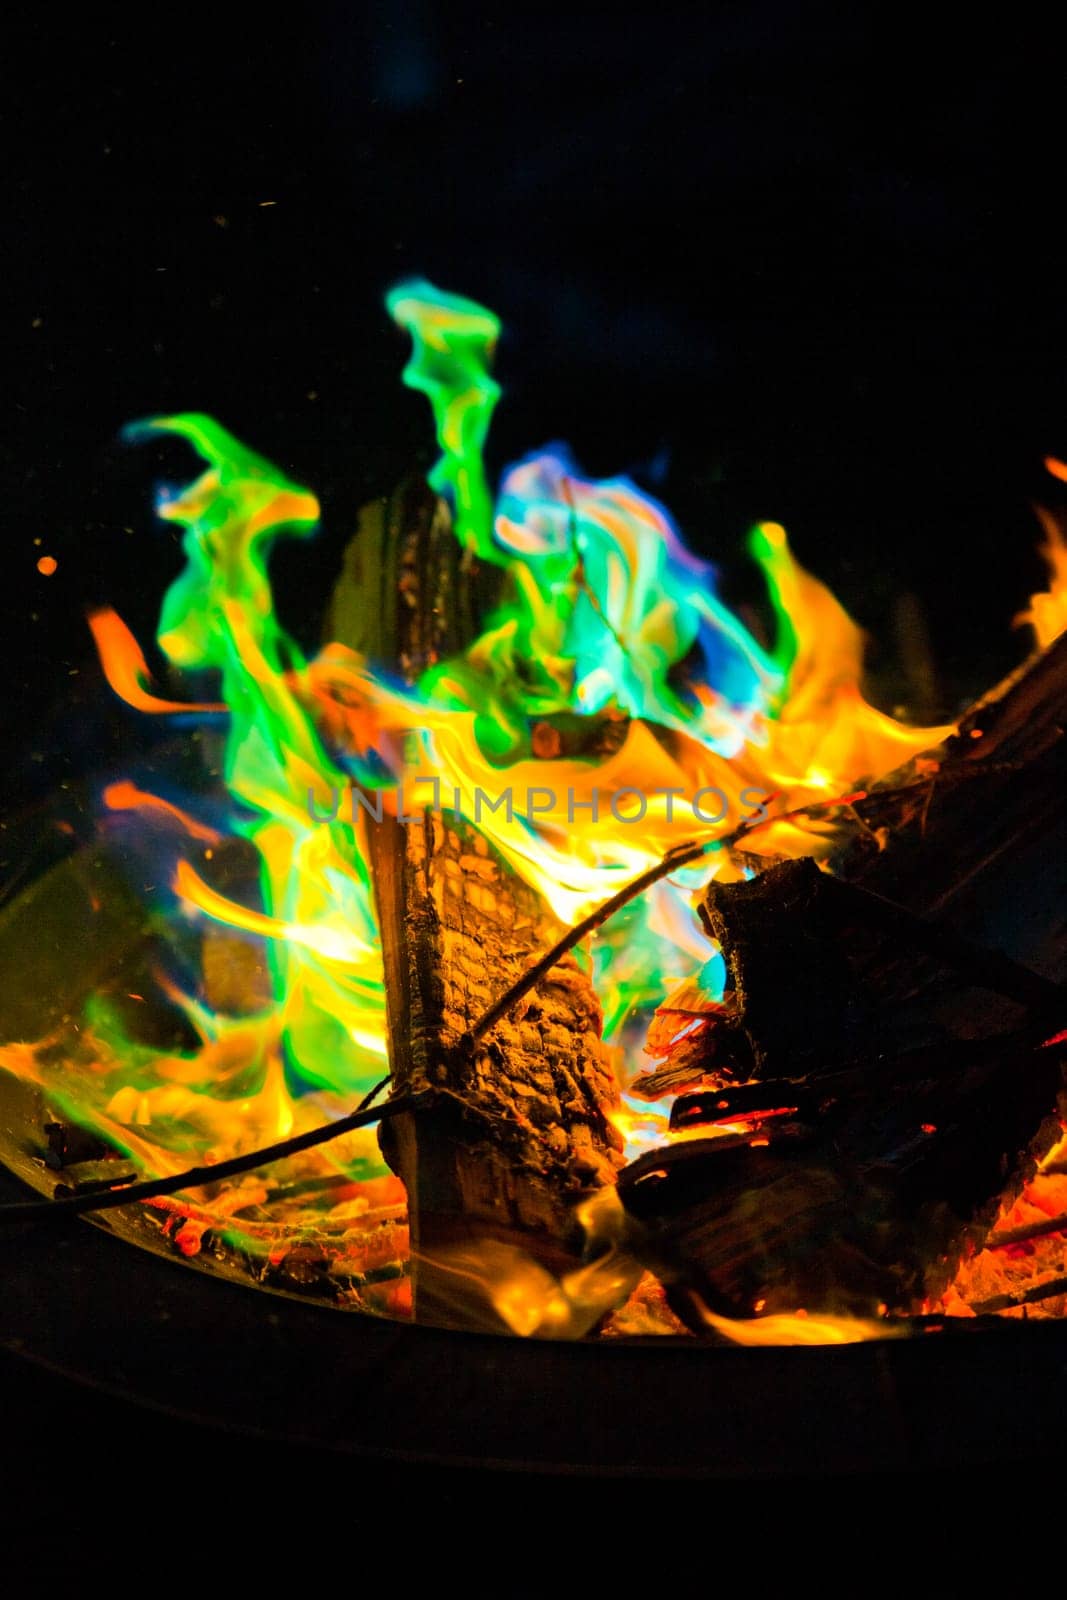 Experience the mesmerizing dance of vibrant flames in a captivating fire pit. The enchanting blend of green, blue, and traditional orange hues creates a magical display. Shot in a close-up perspective.